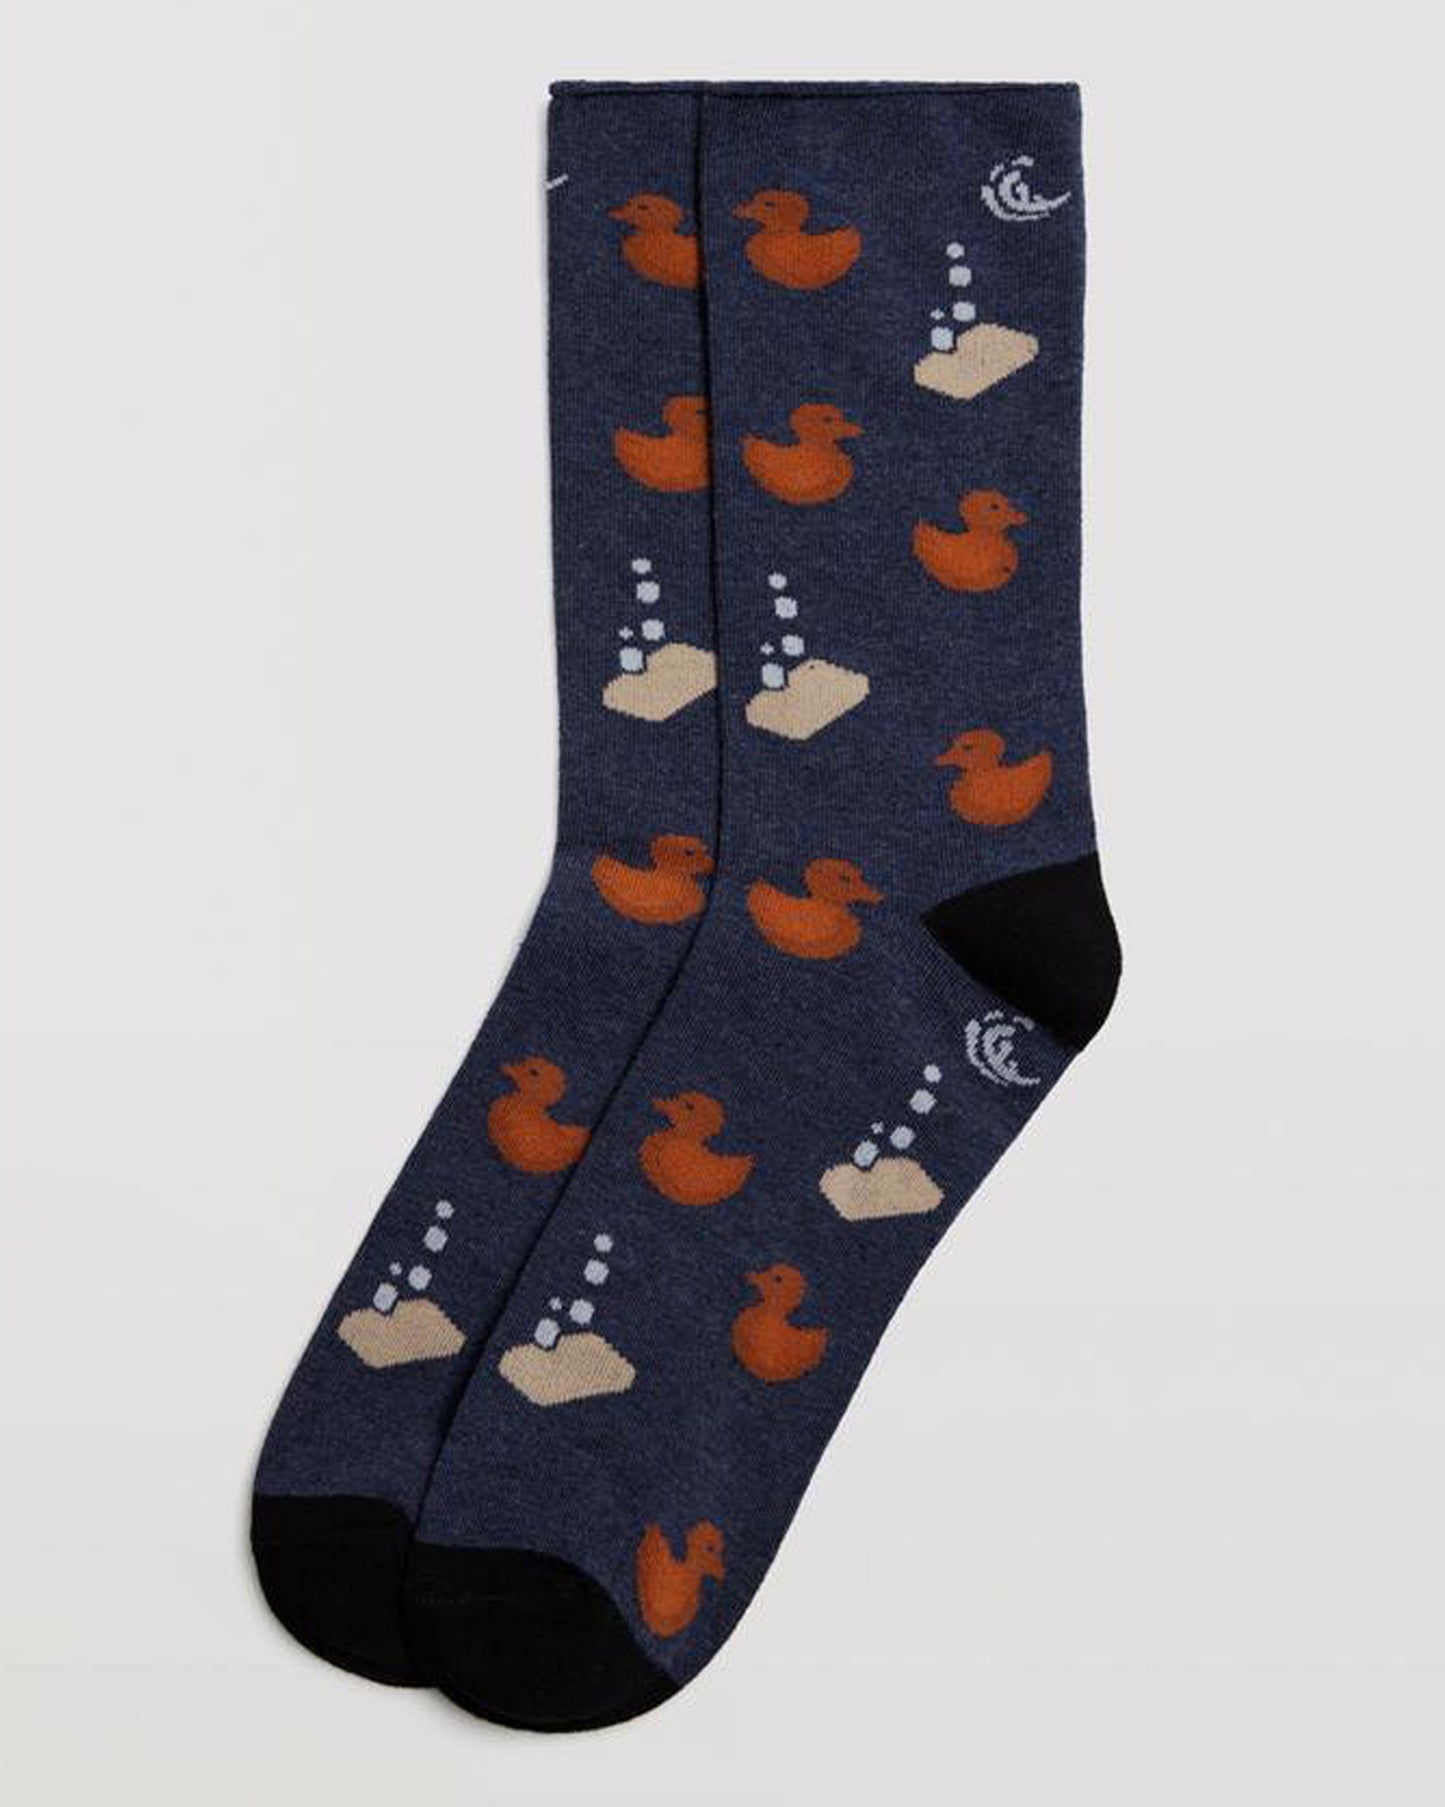 Ysabel Mora 22882 Rubber Duck Sock - Denim blue cotton mix crew length ankle socks with a rusty orange rubber duck and sudsy soap pattern, black heel and toe and no cuff comfort top.